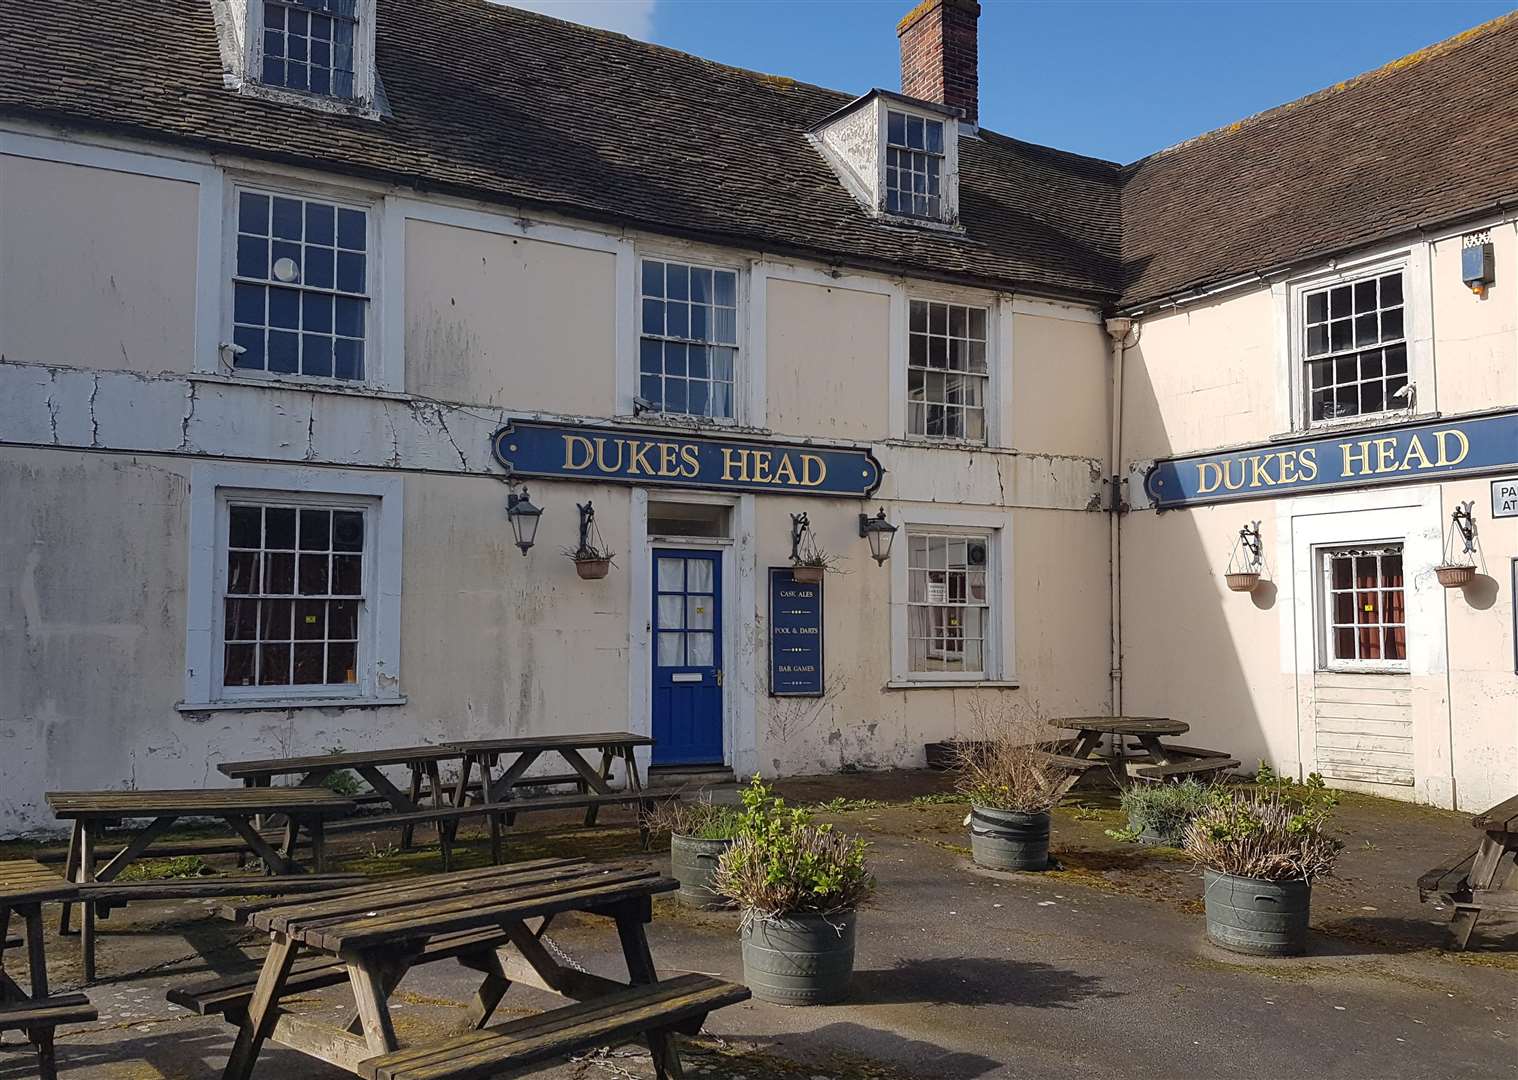 A quarter of million pounds has been slashed off the asking price for the Dukes Head in Hythe